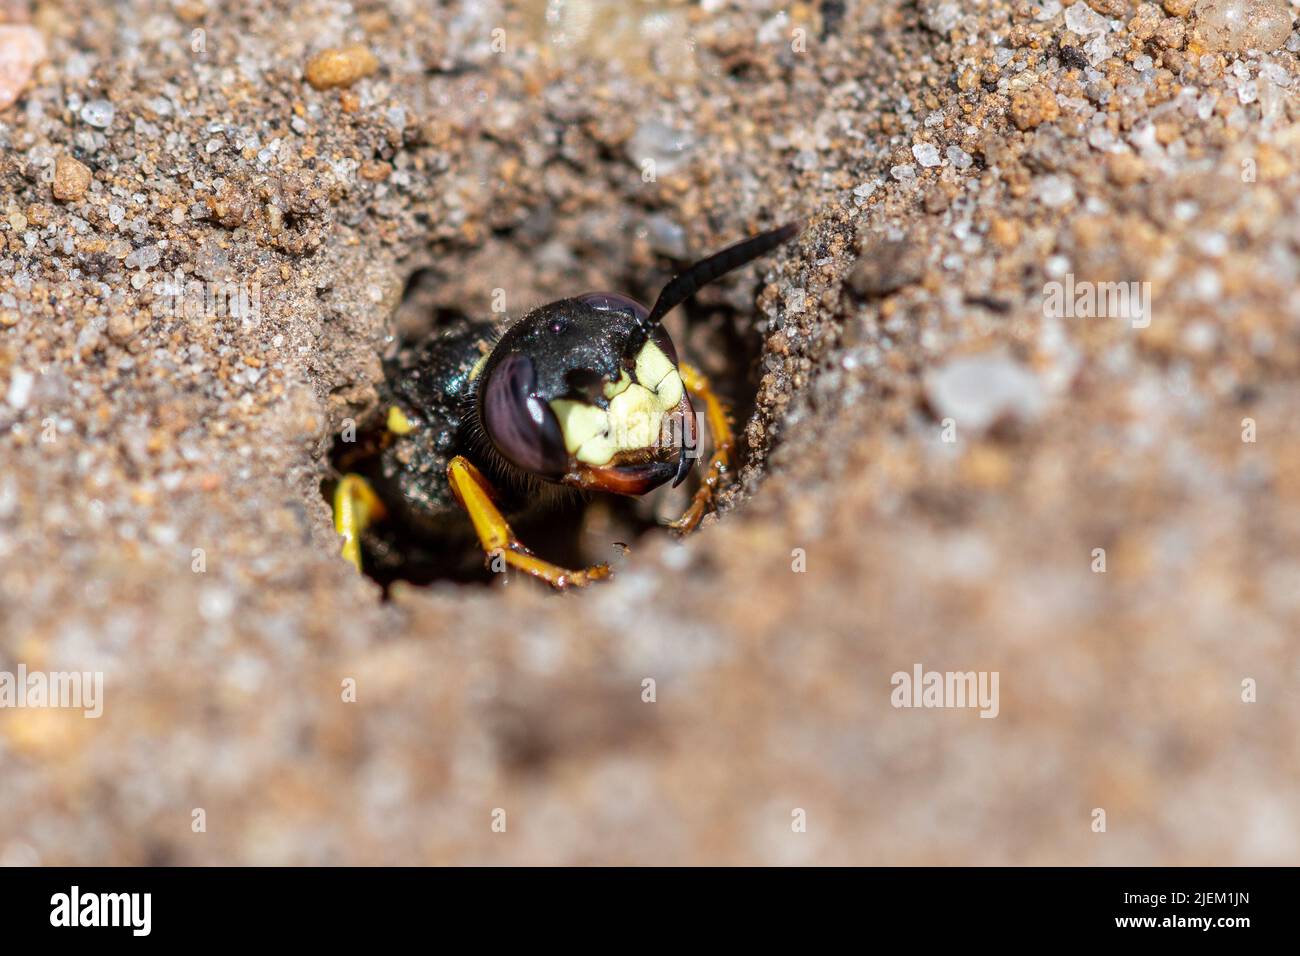 European beewolf (Philanthus triangulum), a solitary wasp species on sandy heath in Surrey, England, UK. Female at entrance to her nest burrow in sand Stock Photo